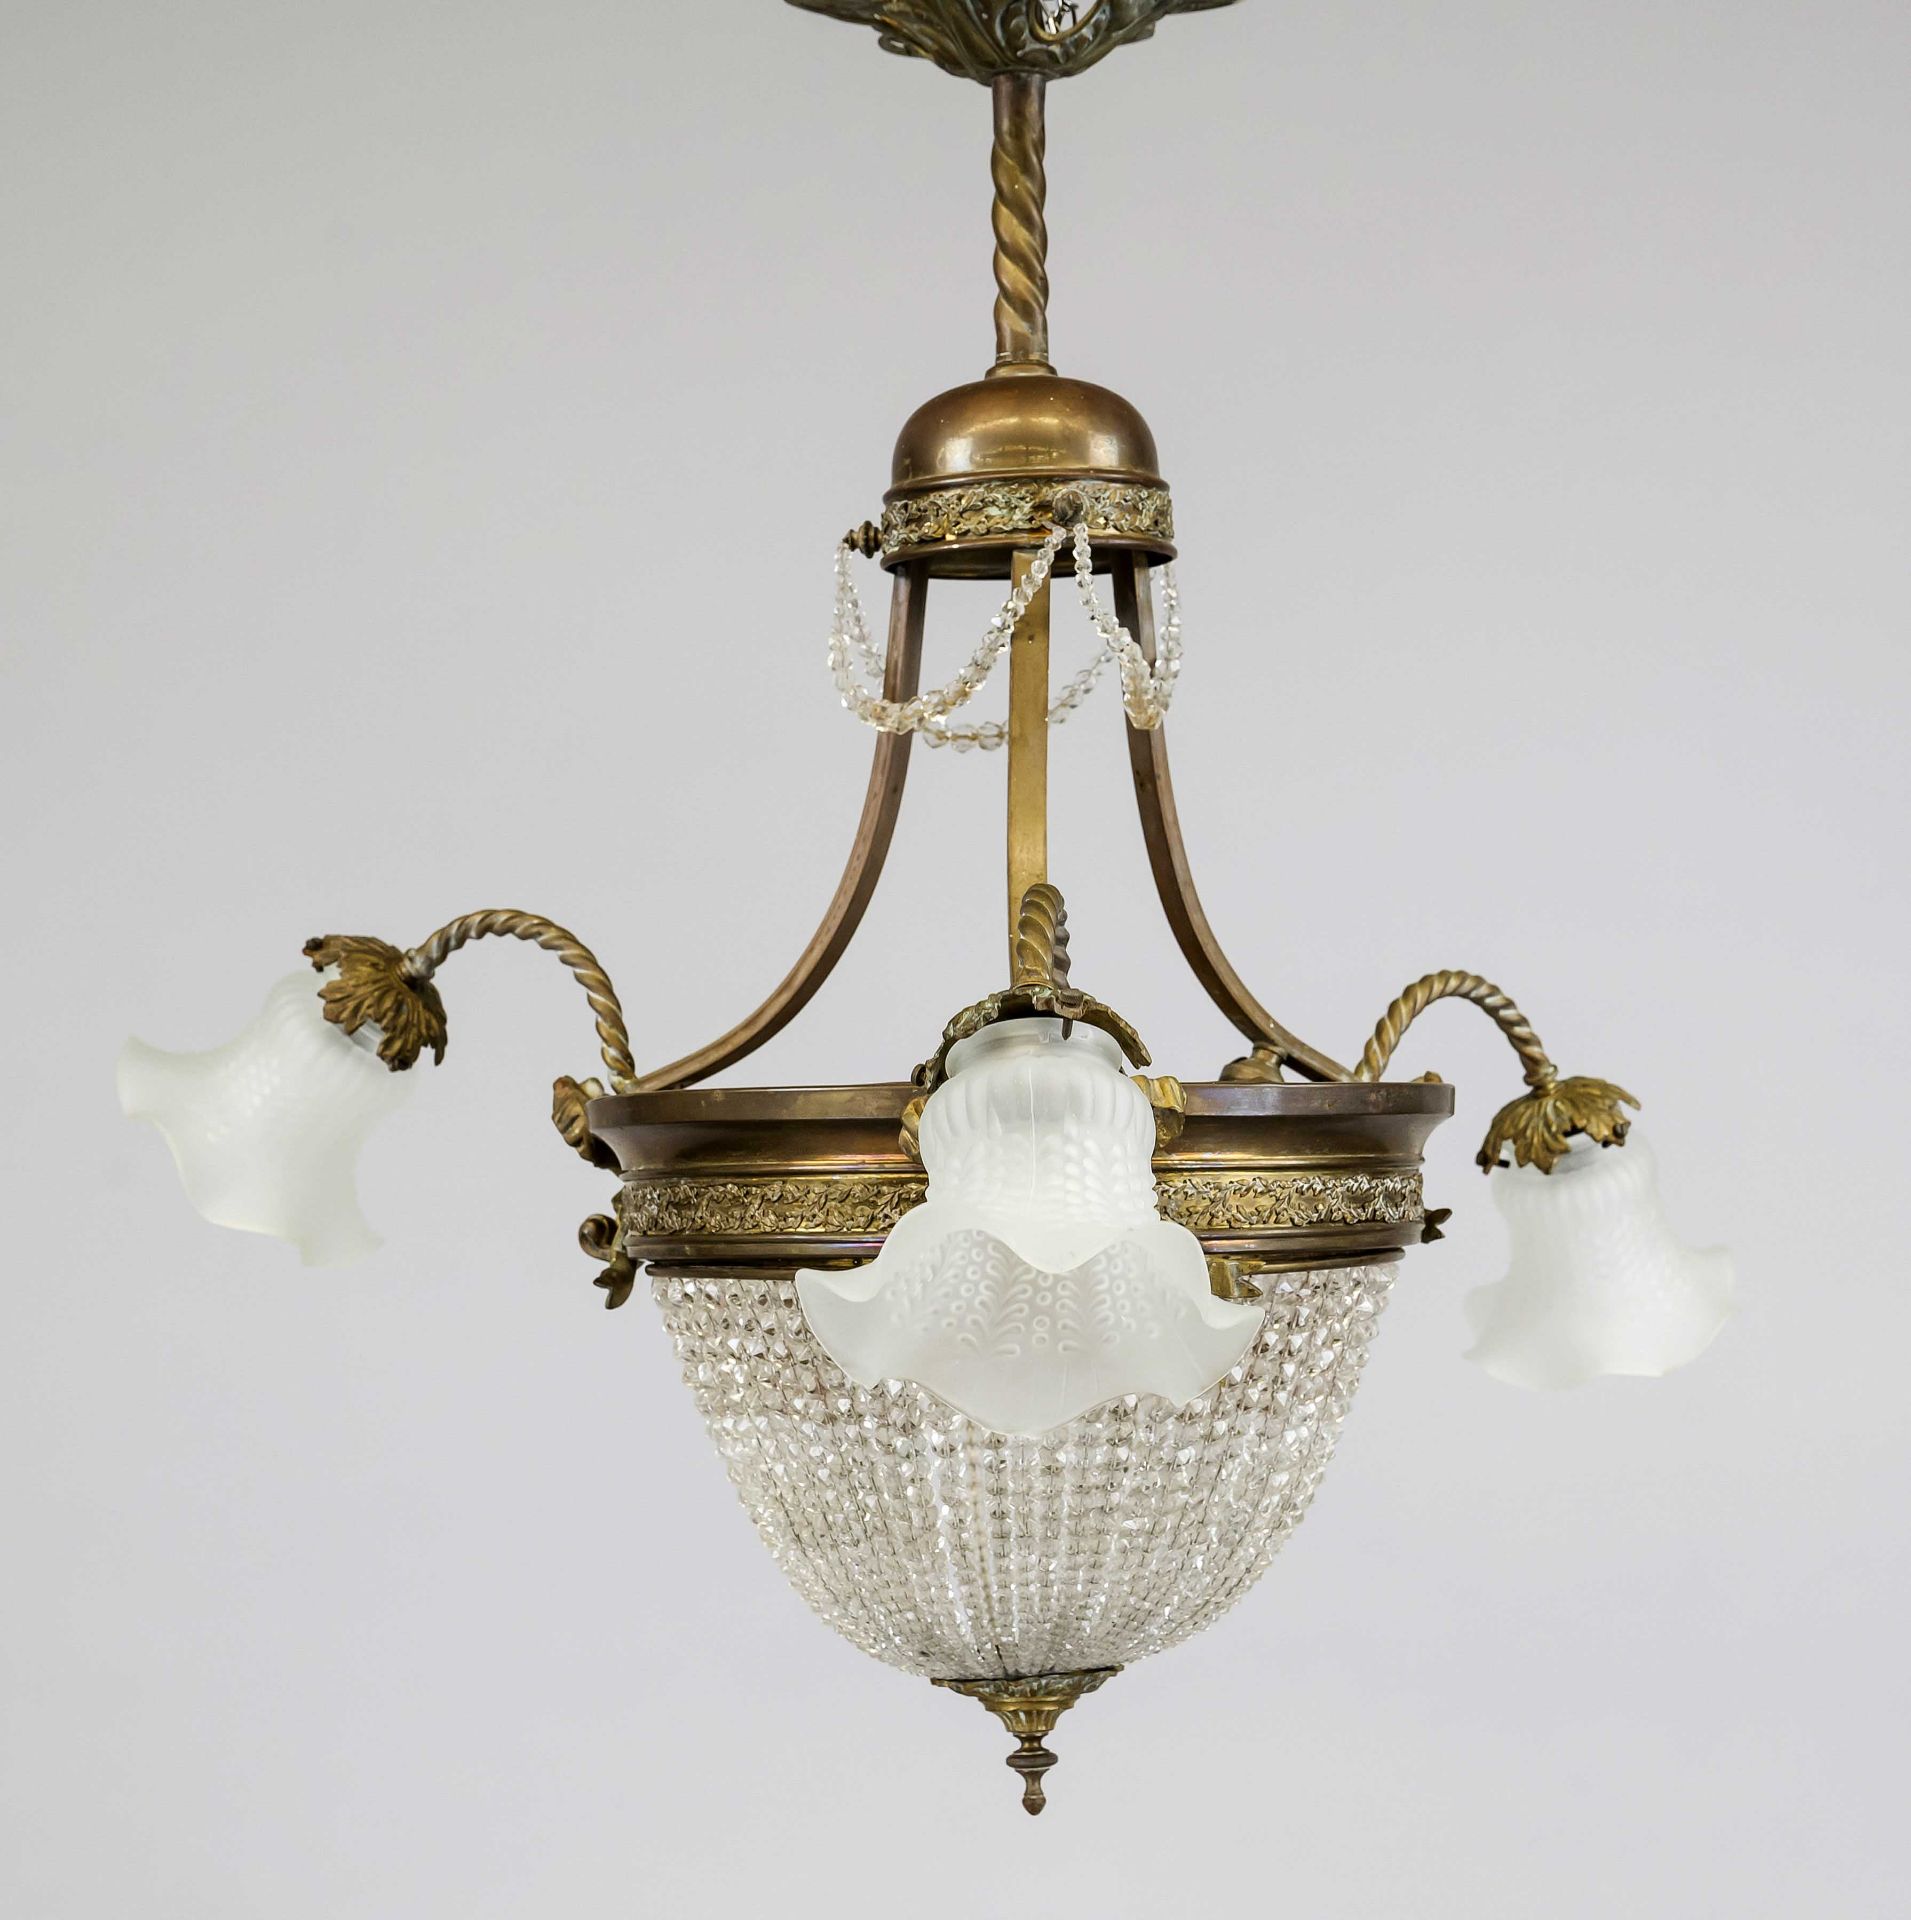 Ceiling lamp, late 19th century Ornamented mesing wreath on a tripod frame. 3 curved chandelier arms